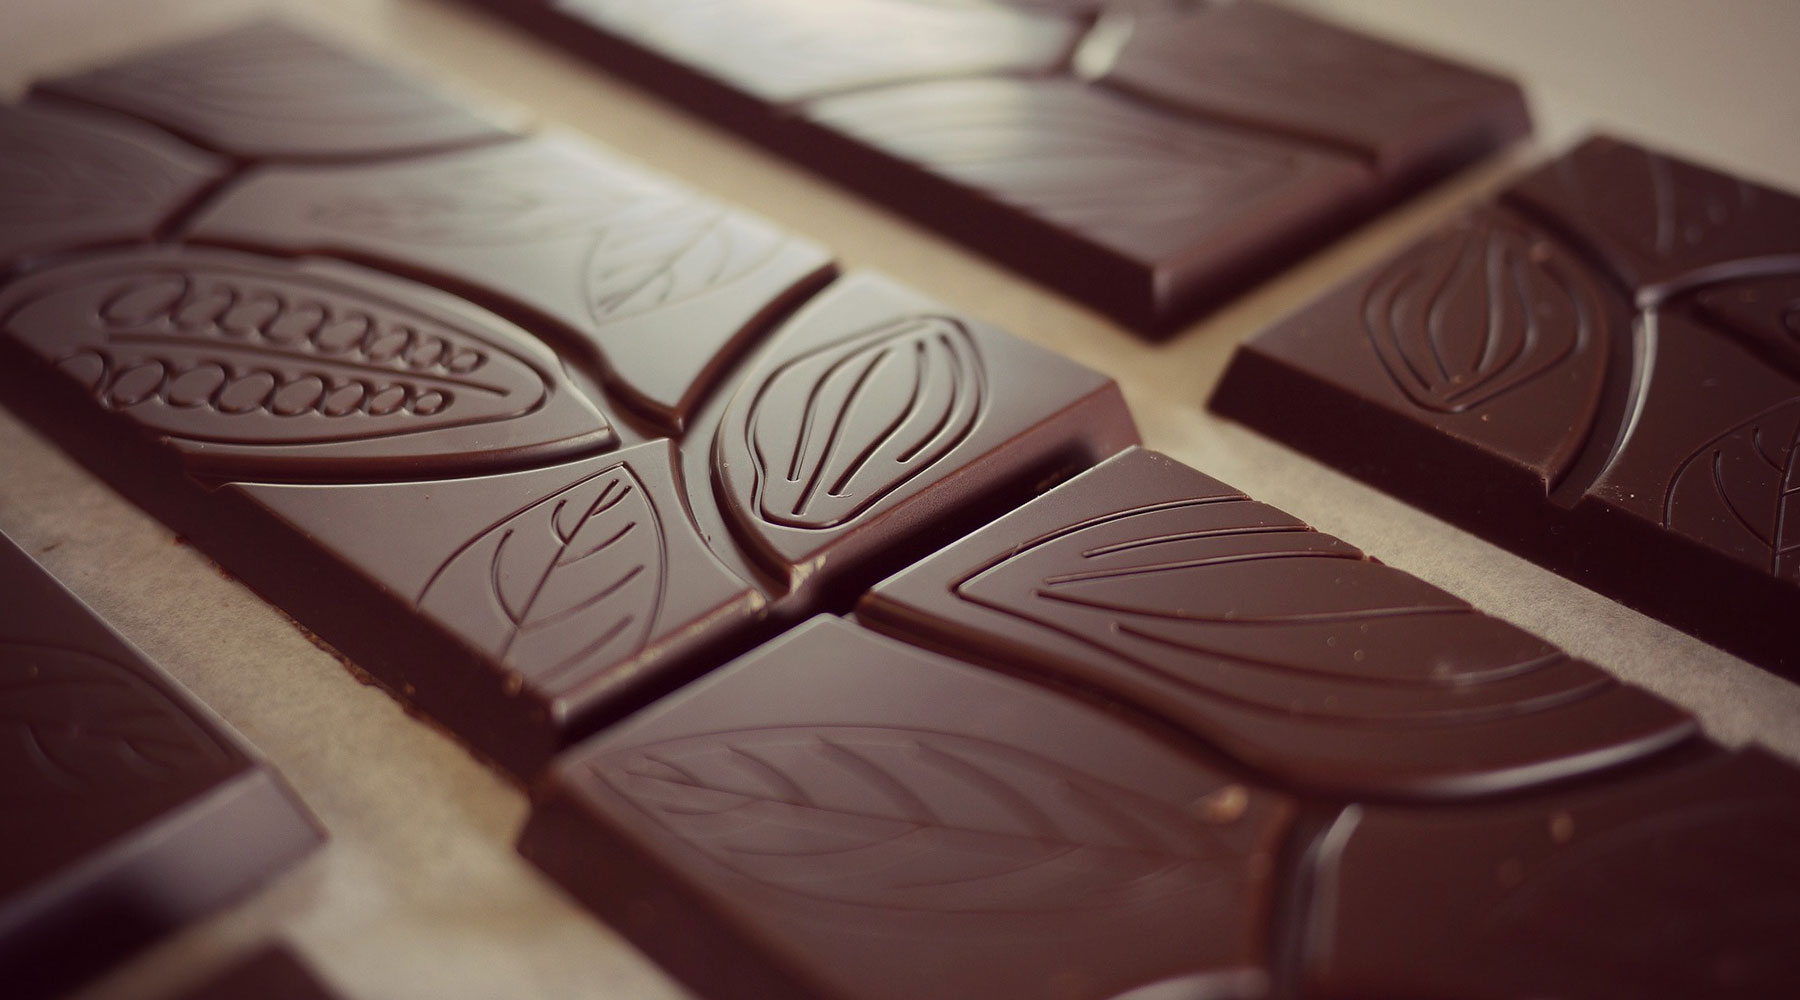 A completed chocolate bar with a mold inlay of a cacao pod and beans.